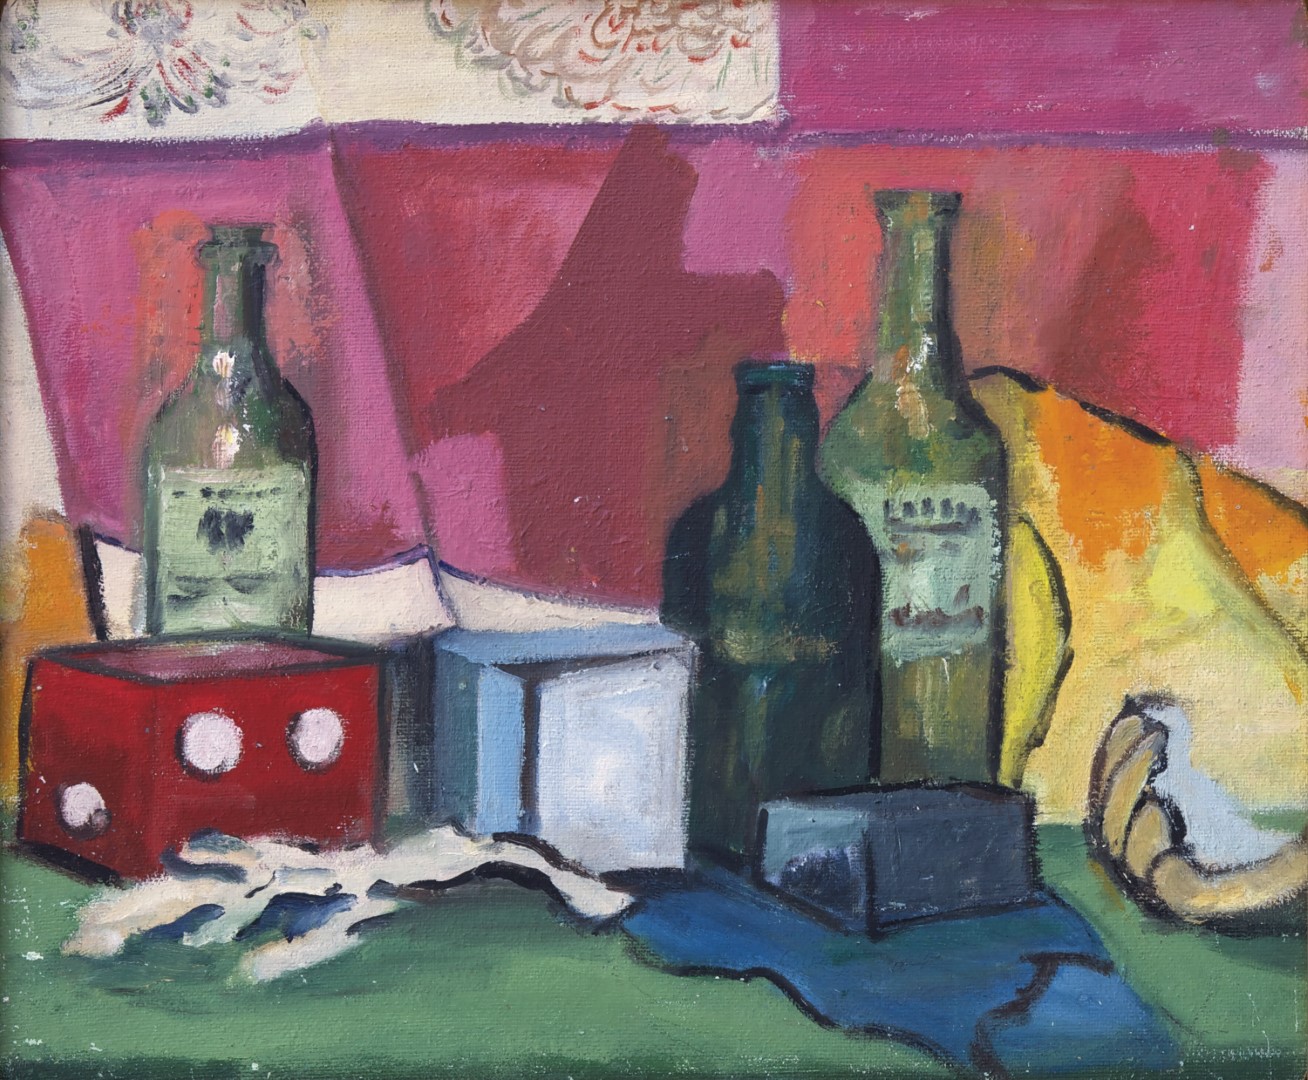 Still life of empty wine bottles and colorful boxes situated in front of a magenta background. There is a hand-like element that seems to reach into the frame from the bottom right.